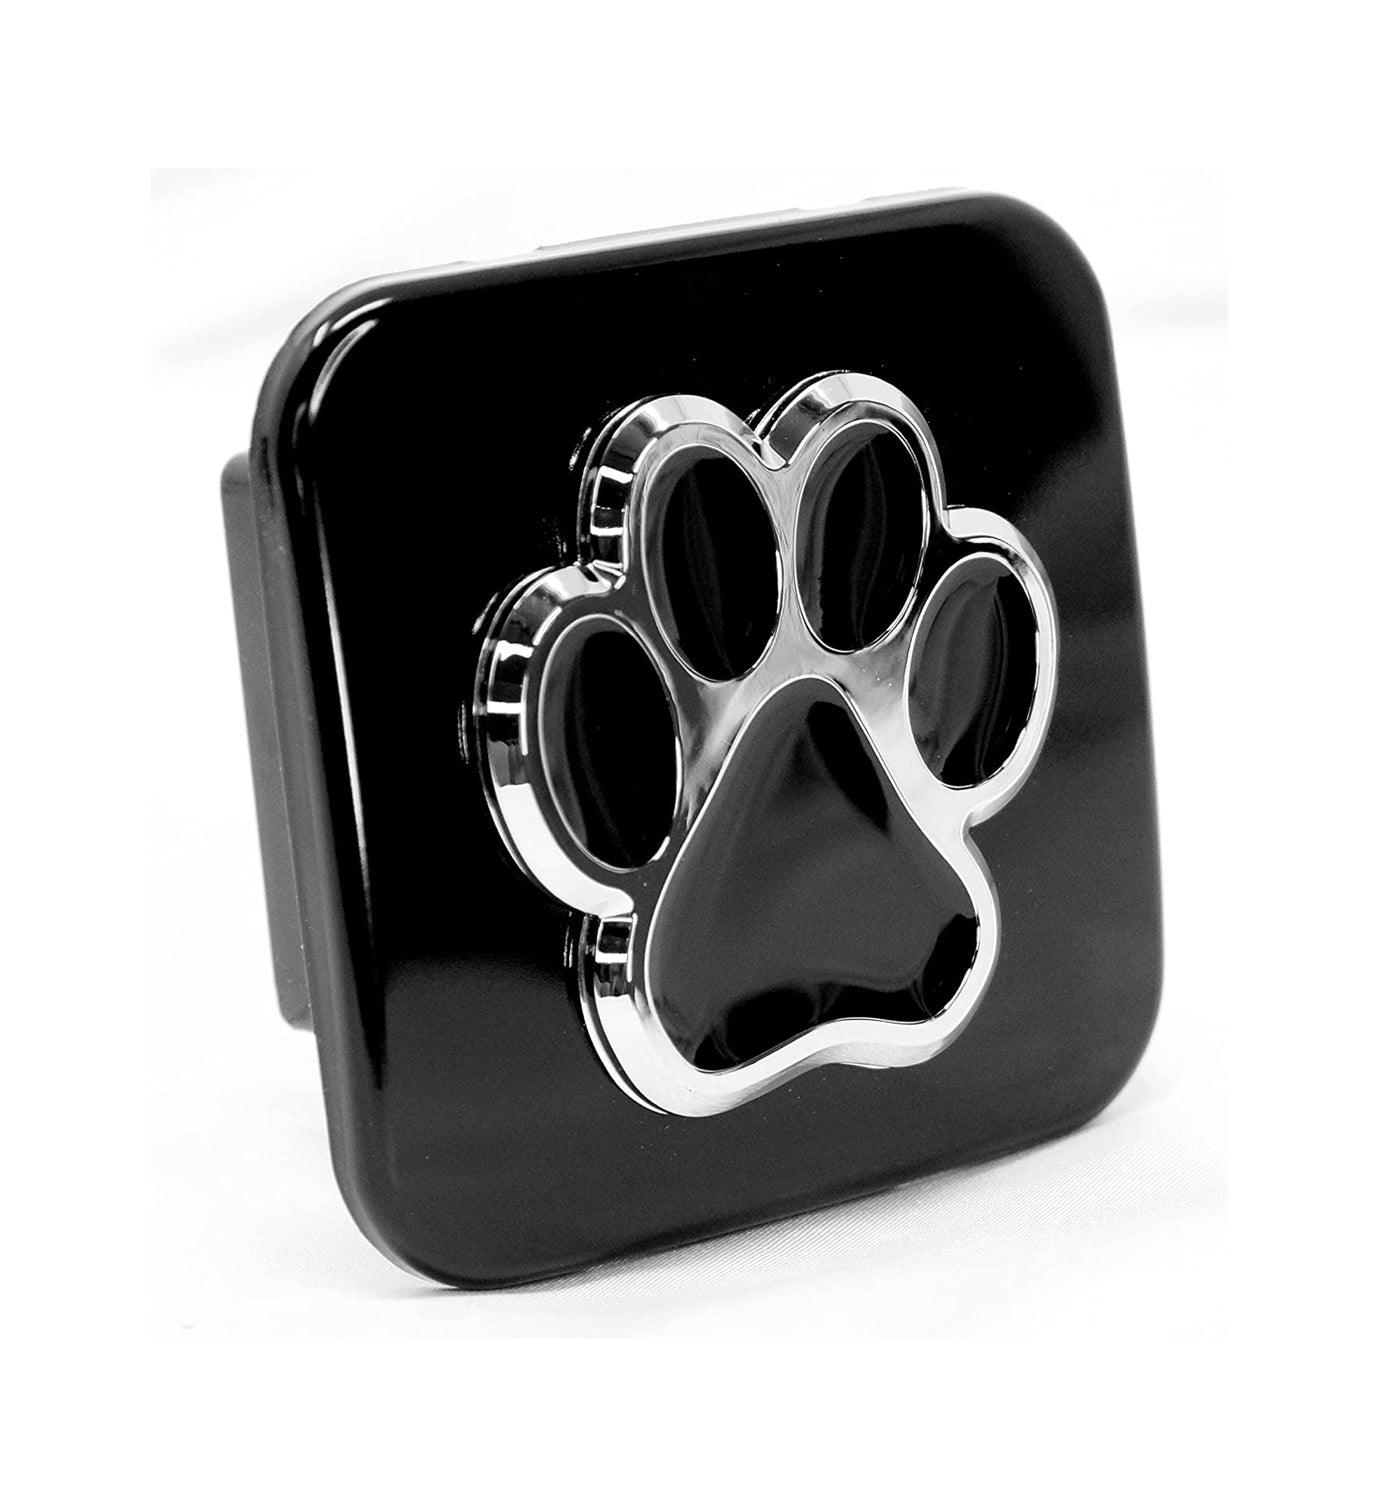 Paw Hitch Cover Plug Insert (Chrome/Black) for 1.25" and 2" Hitch Receivers